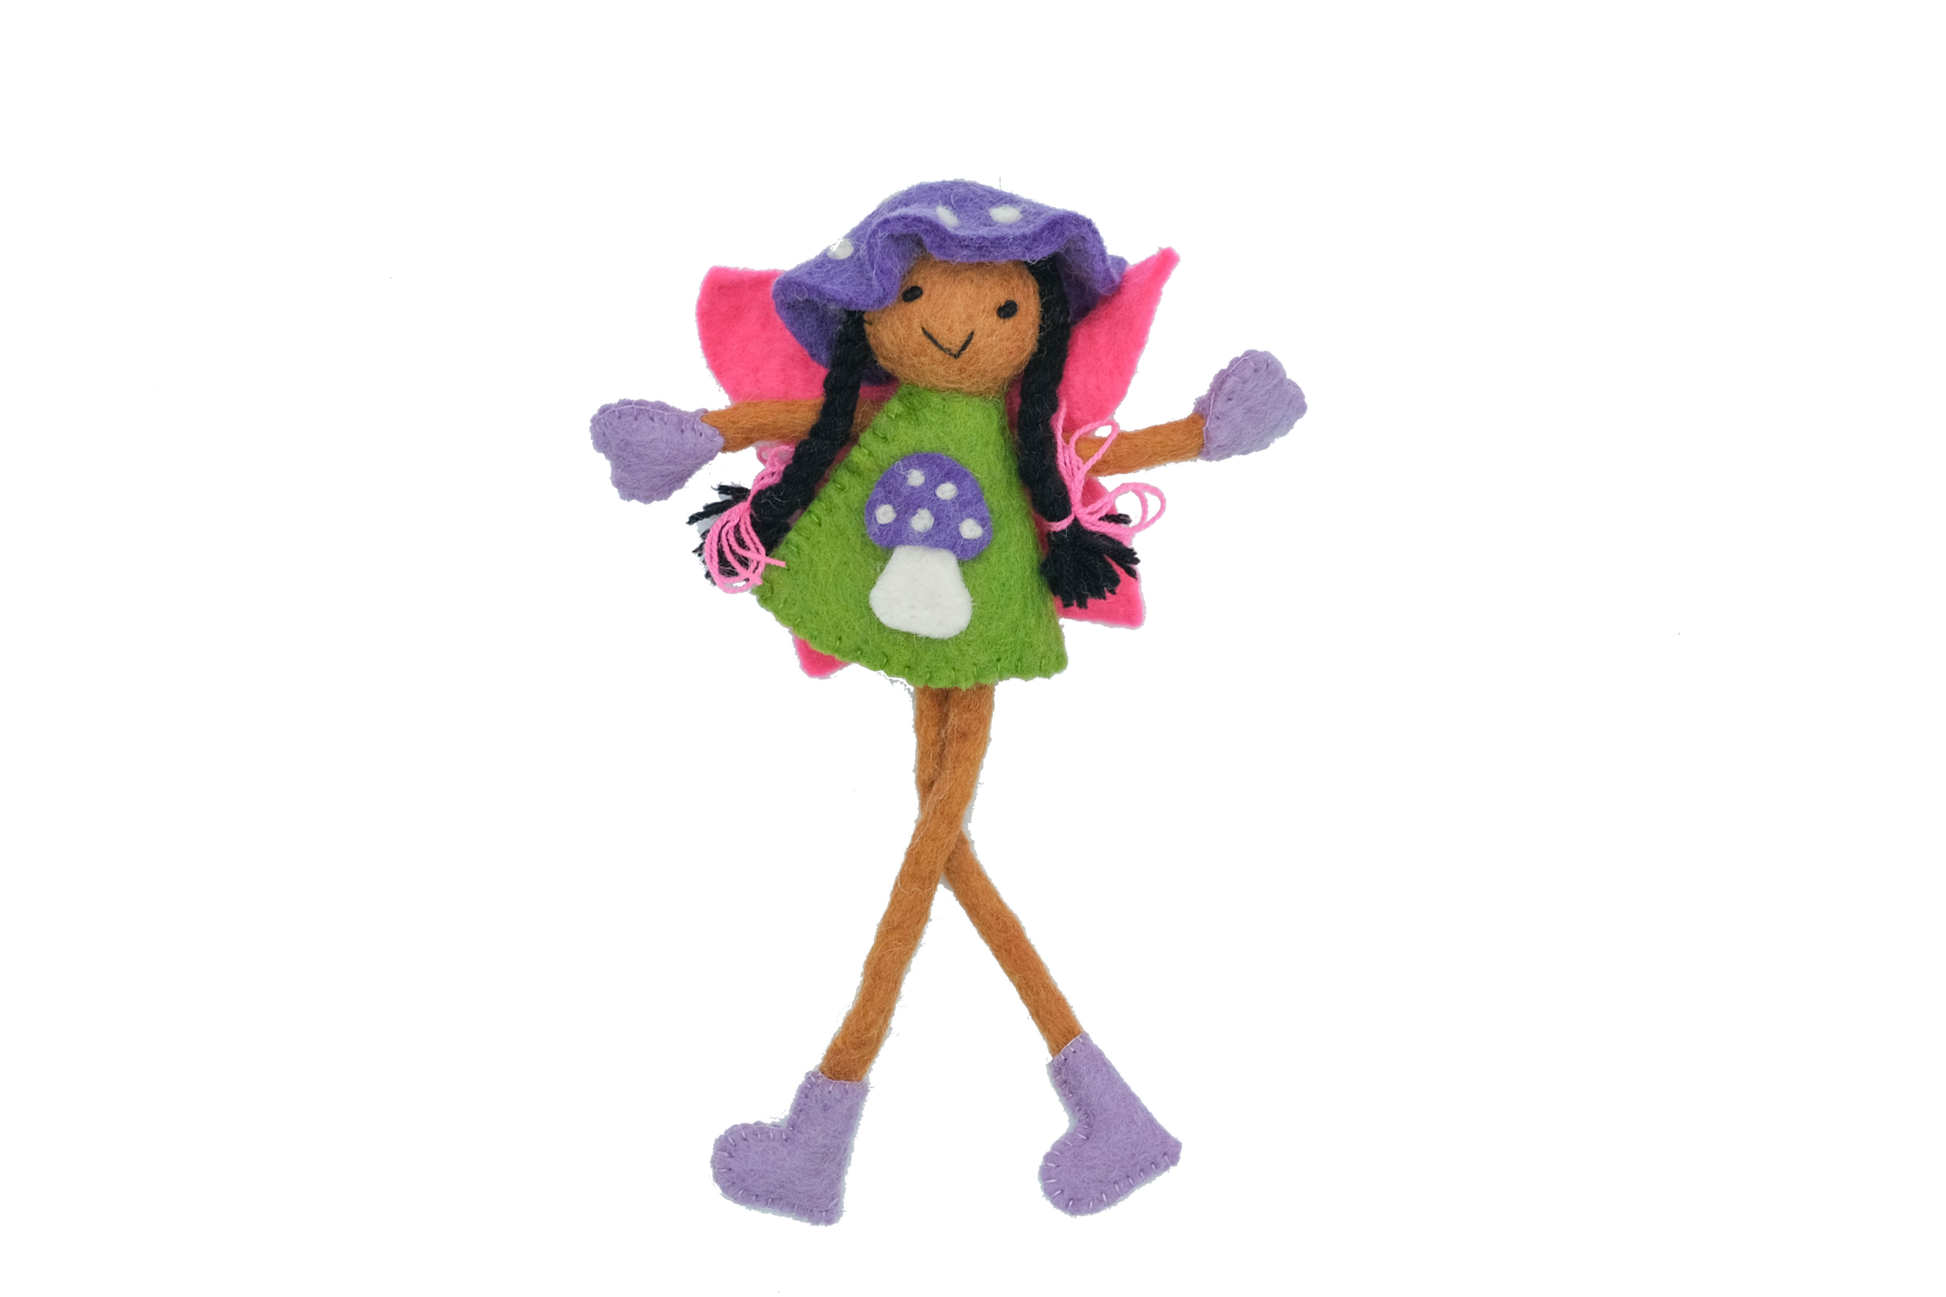 This Global Groove Life, handmade, ethical, fair trade, eco-friendly, sustainable, raven haired, green and pink, mushroom bonnet fairy ,was created by artisans in Kathmandu Nepal and is adorned with an adorable purple mushroom motif.